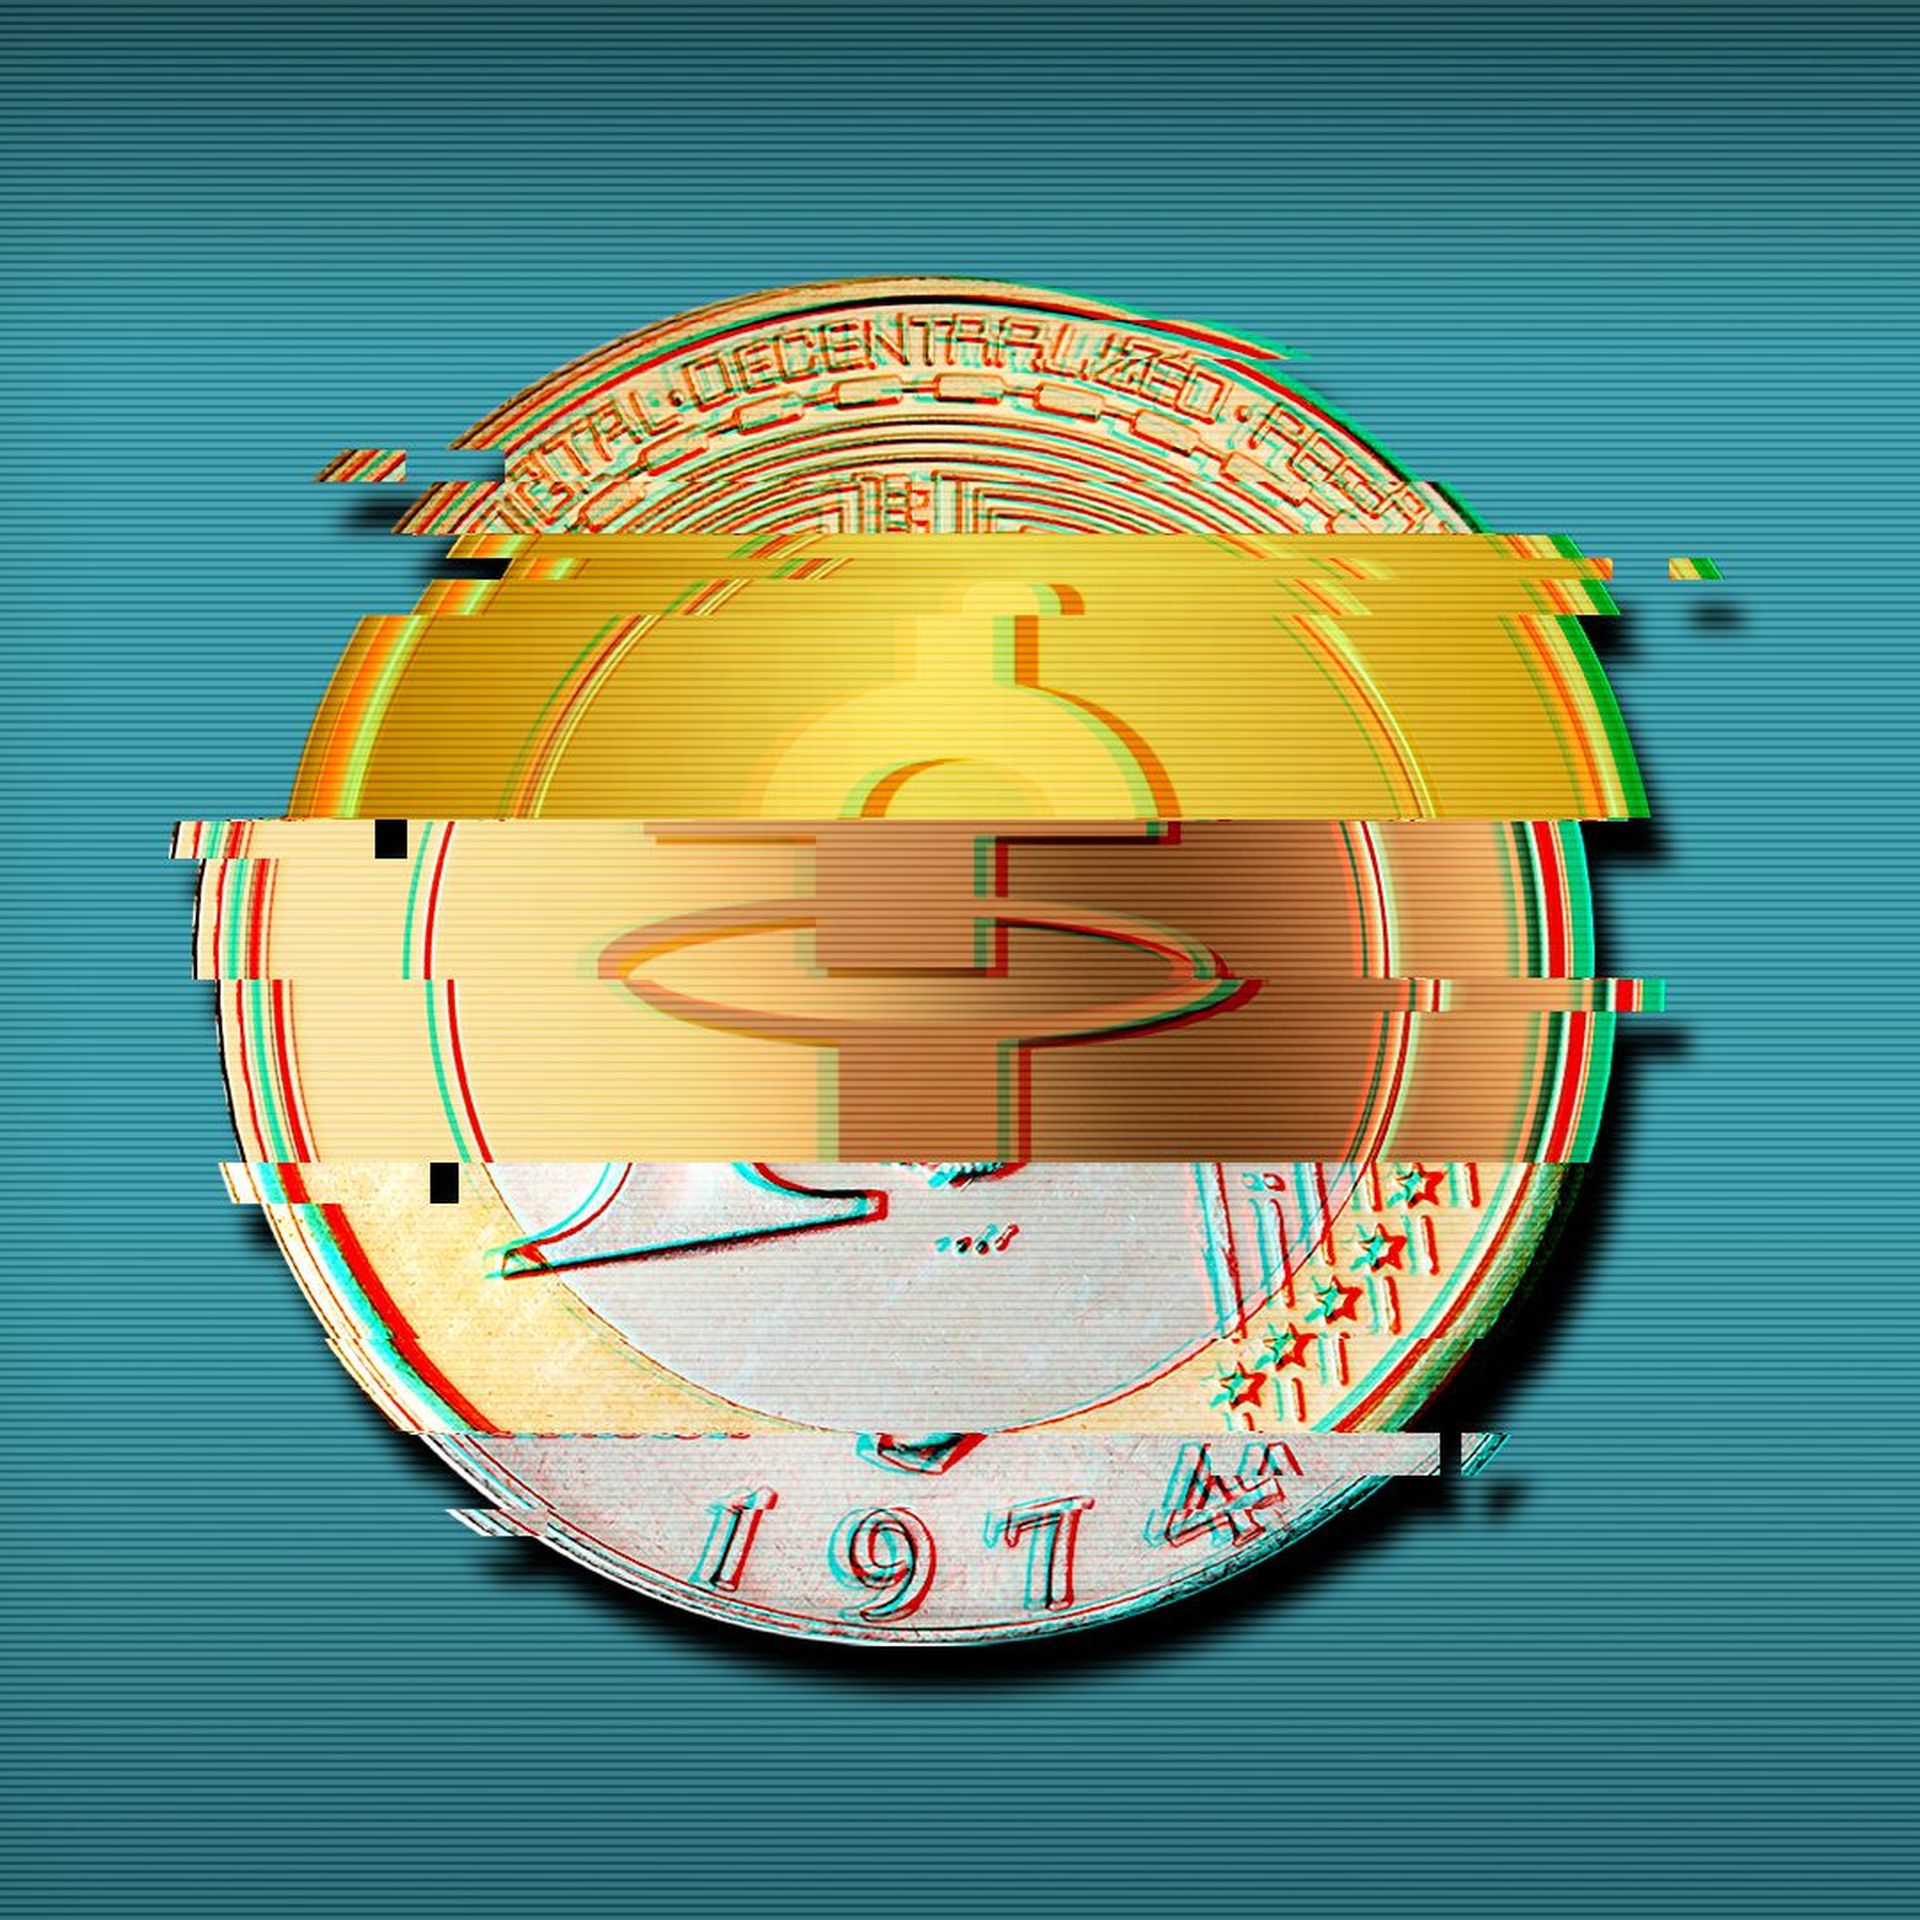 Illustration of several different coins combined to form one glitching coin